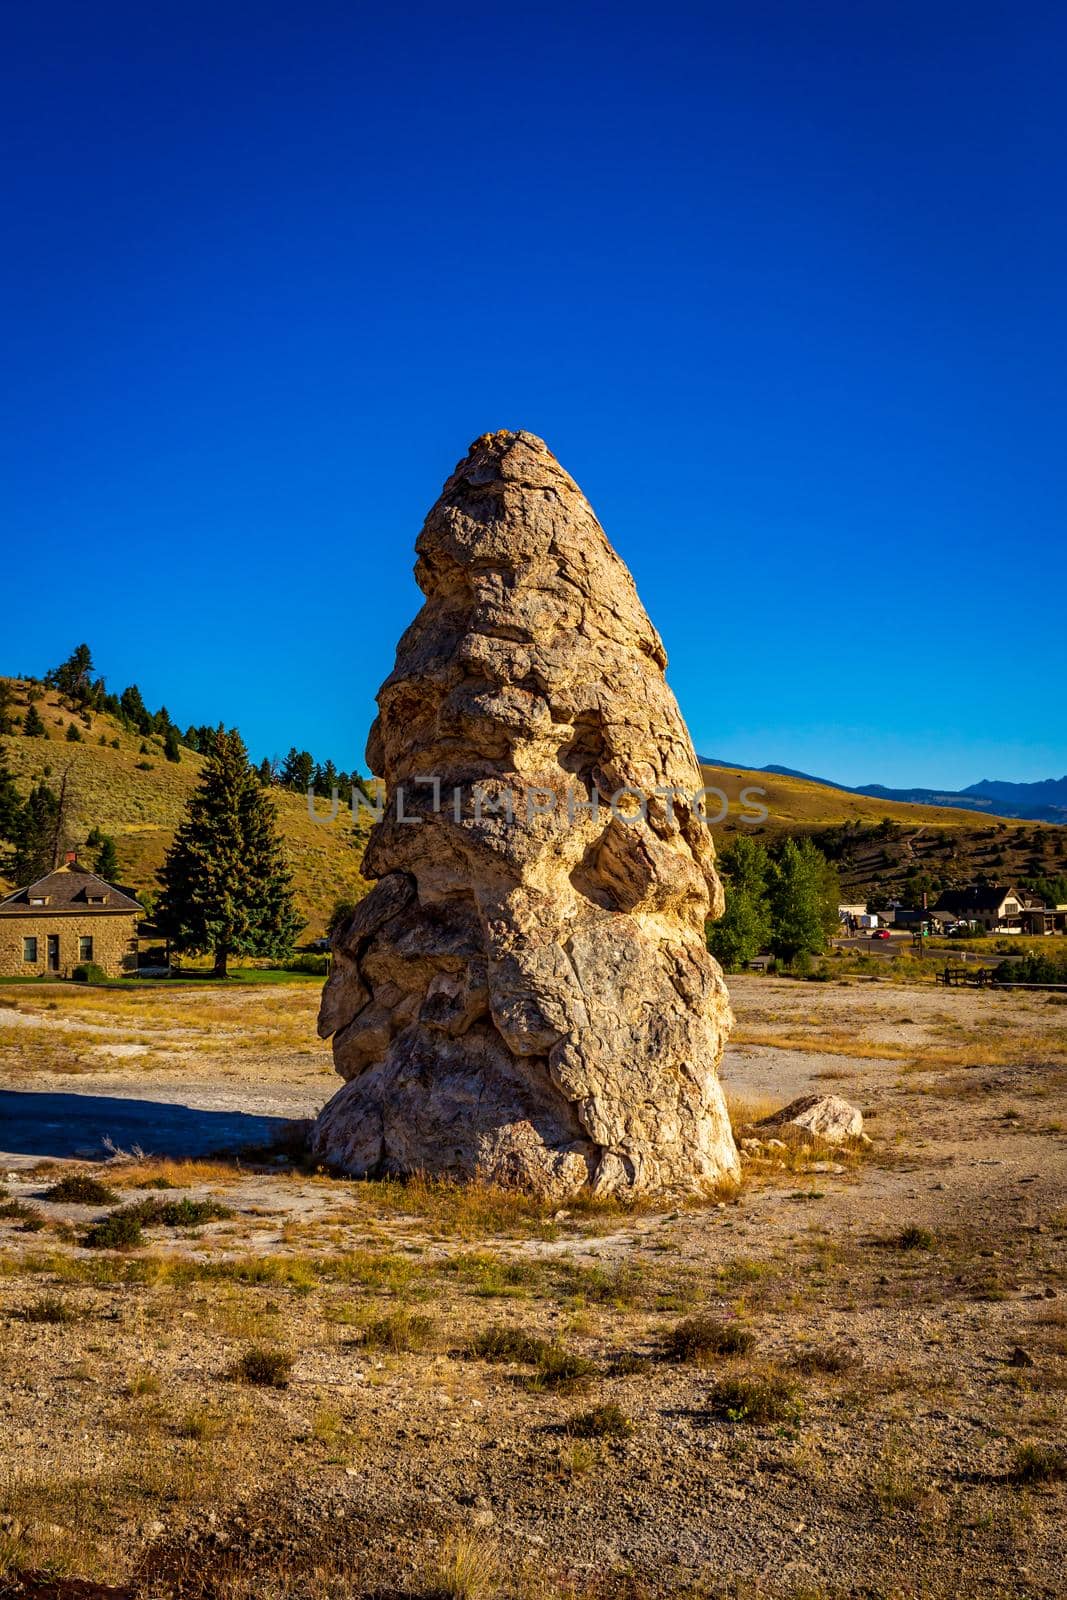 Liberty Cap in Yellowstone by gepeng